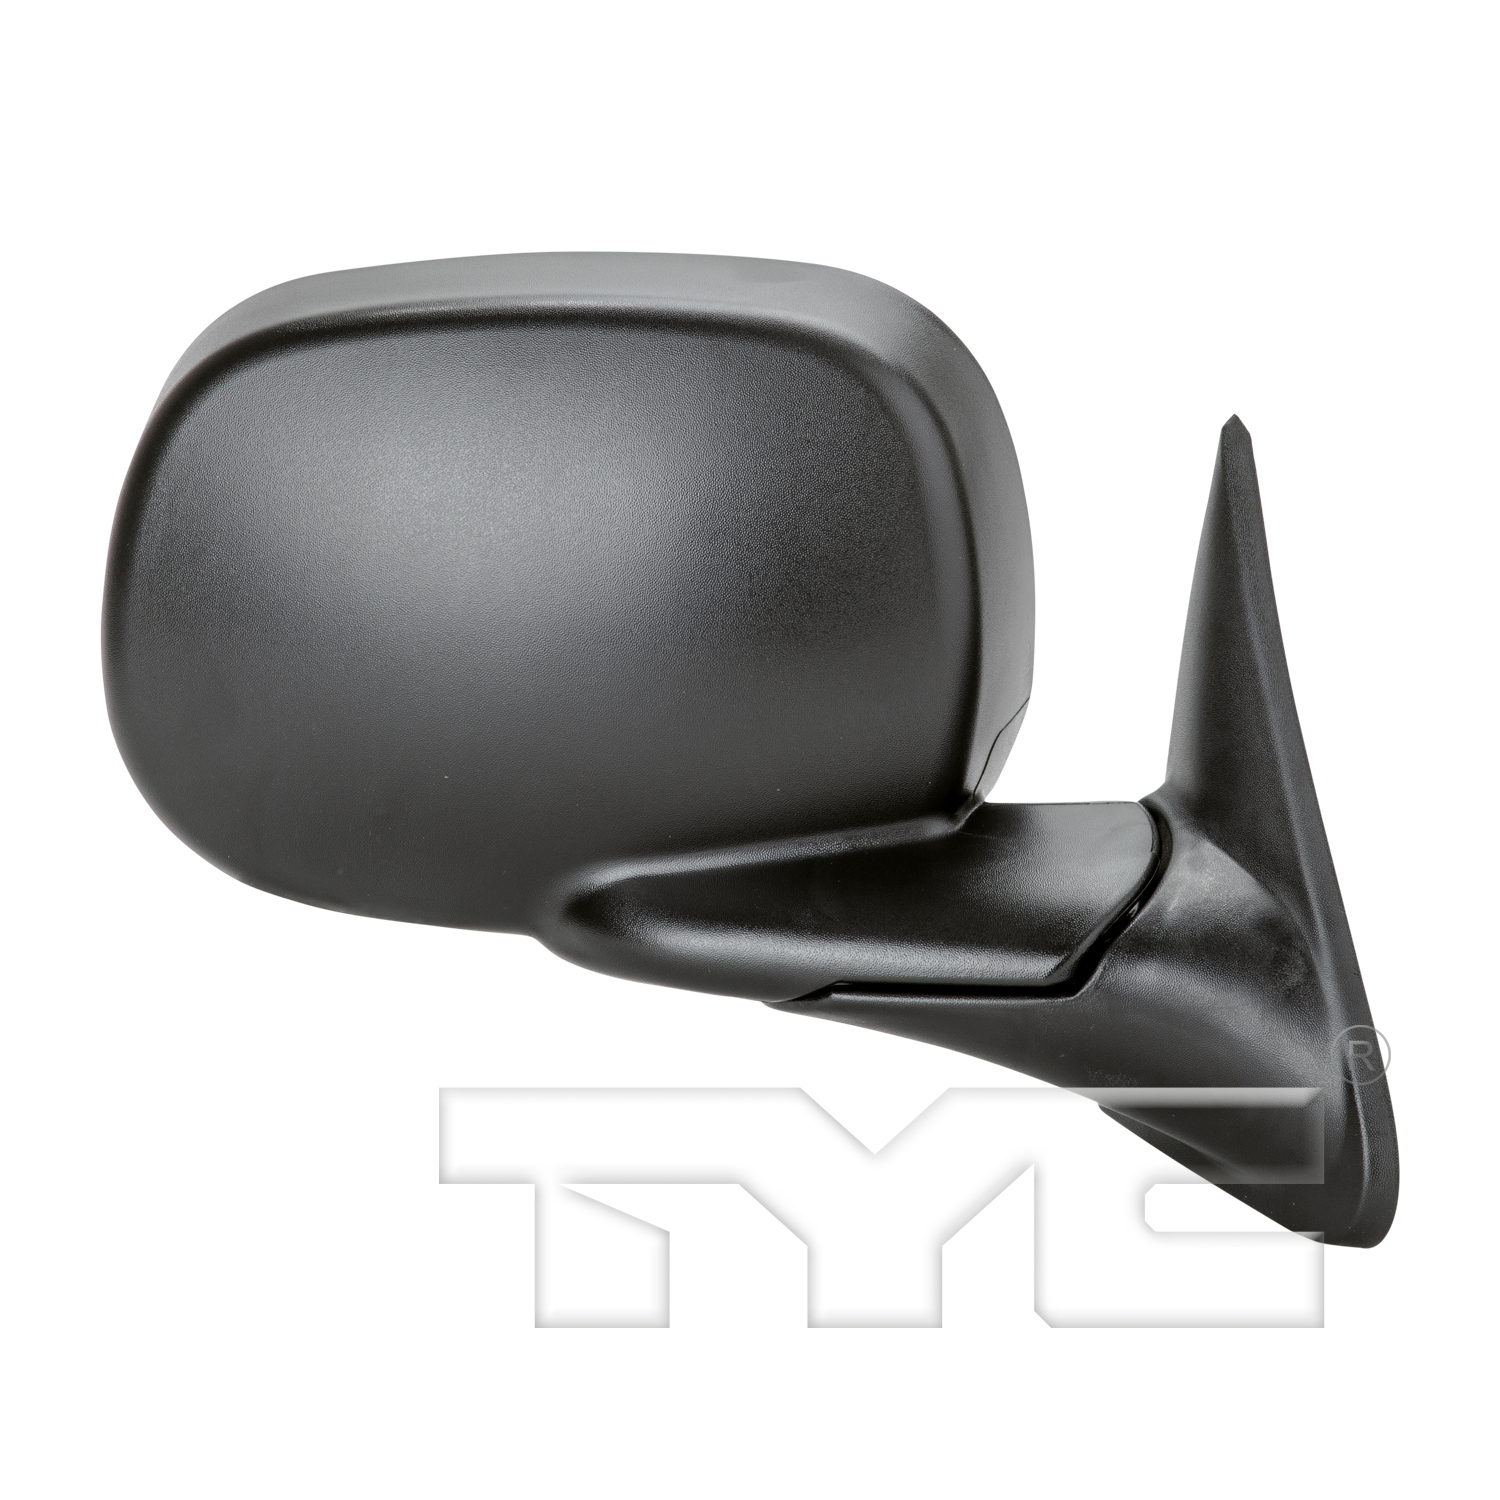 Aftermarket MIRRORS for DODGE - RAM 1500, RAM 1500,98-99,RT Mirror outside rear view